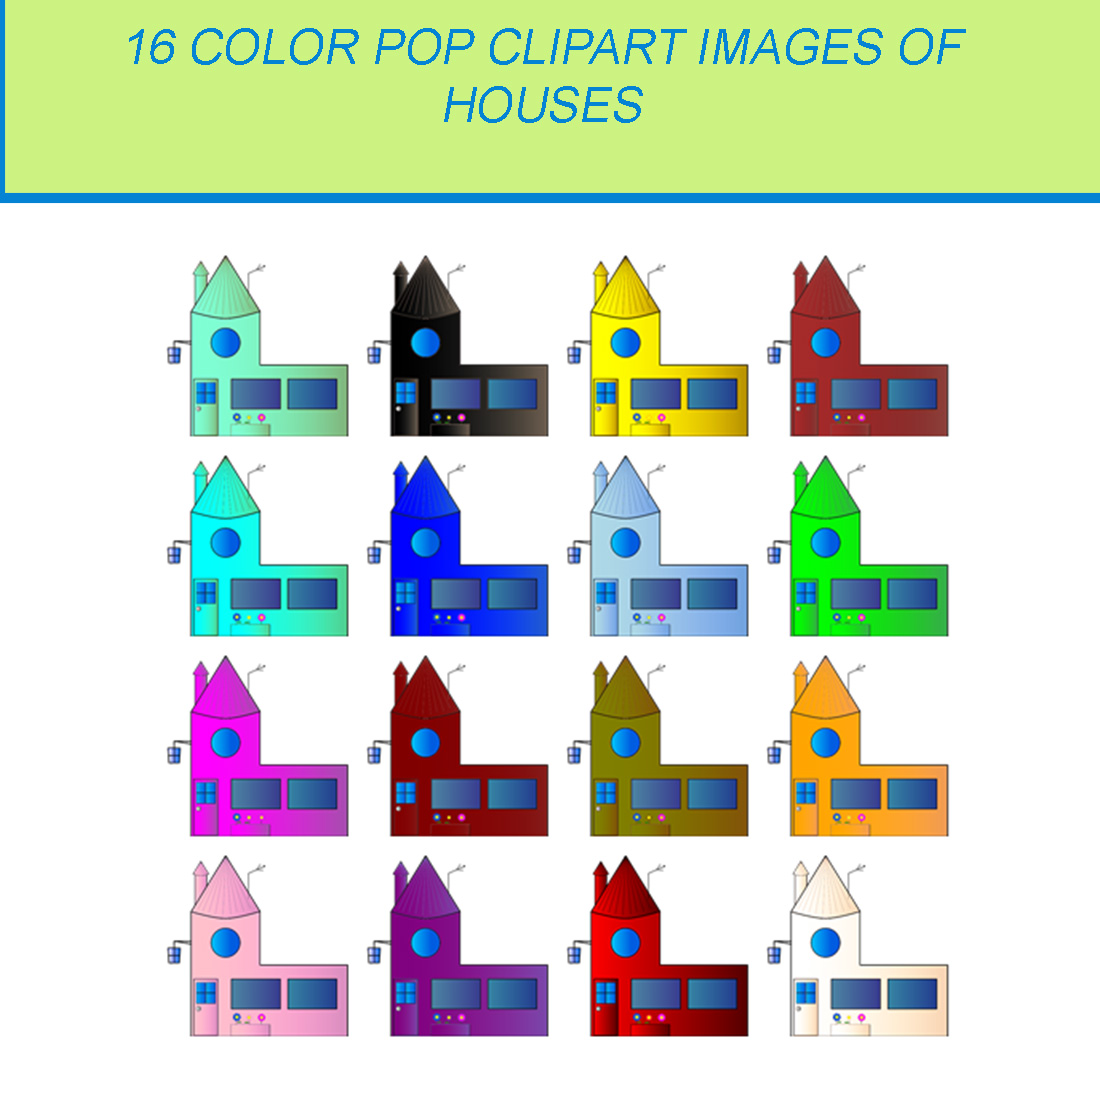 16 COLOR POP CLIPART IMAGES OF HOUSES cover image.